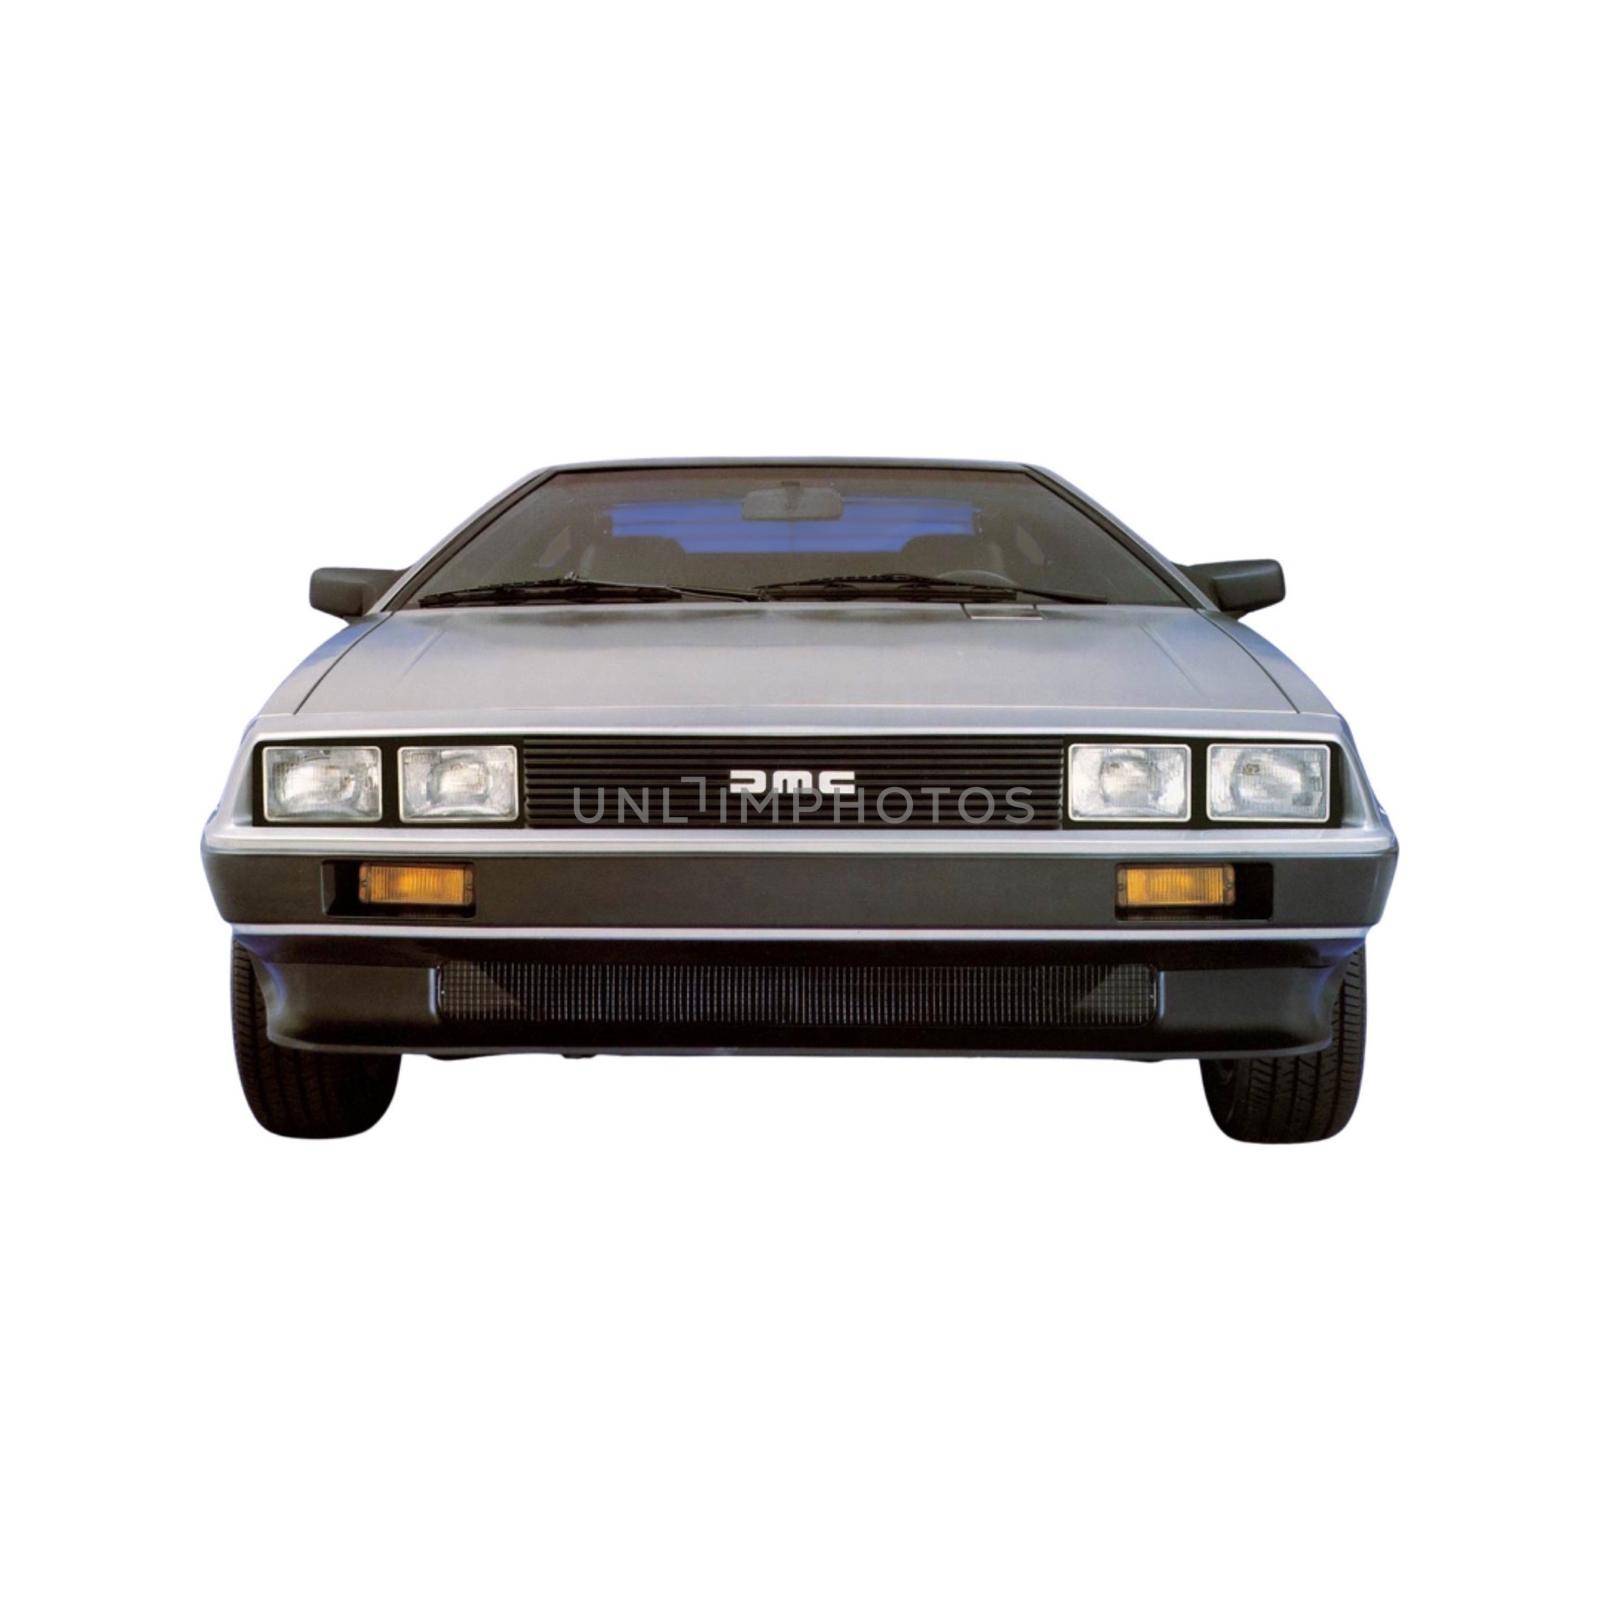 Picture of a Delorean DMC12 by FlyingDoctor